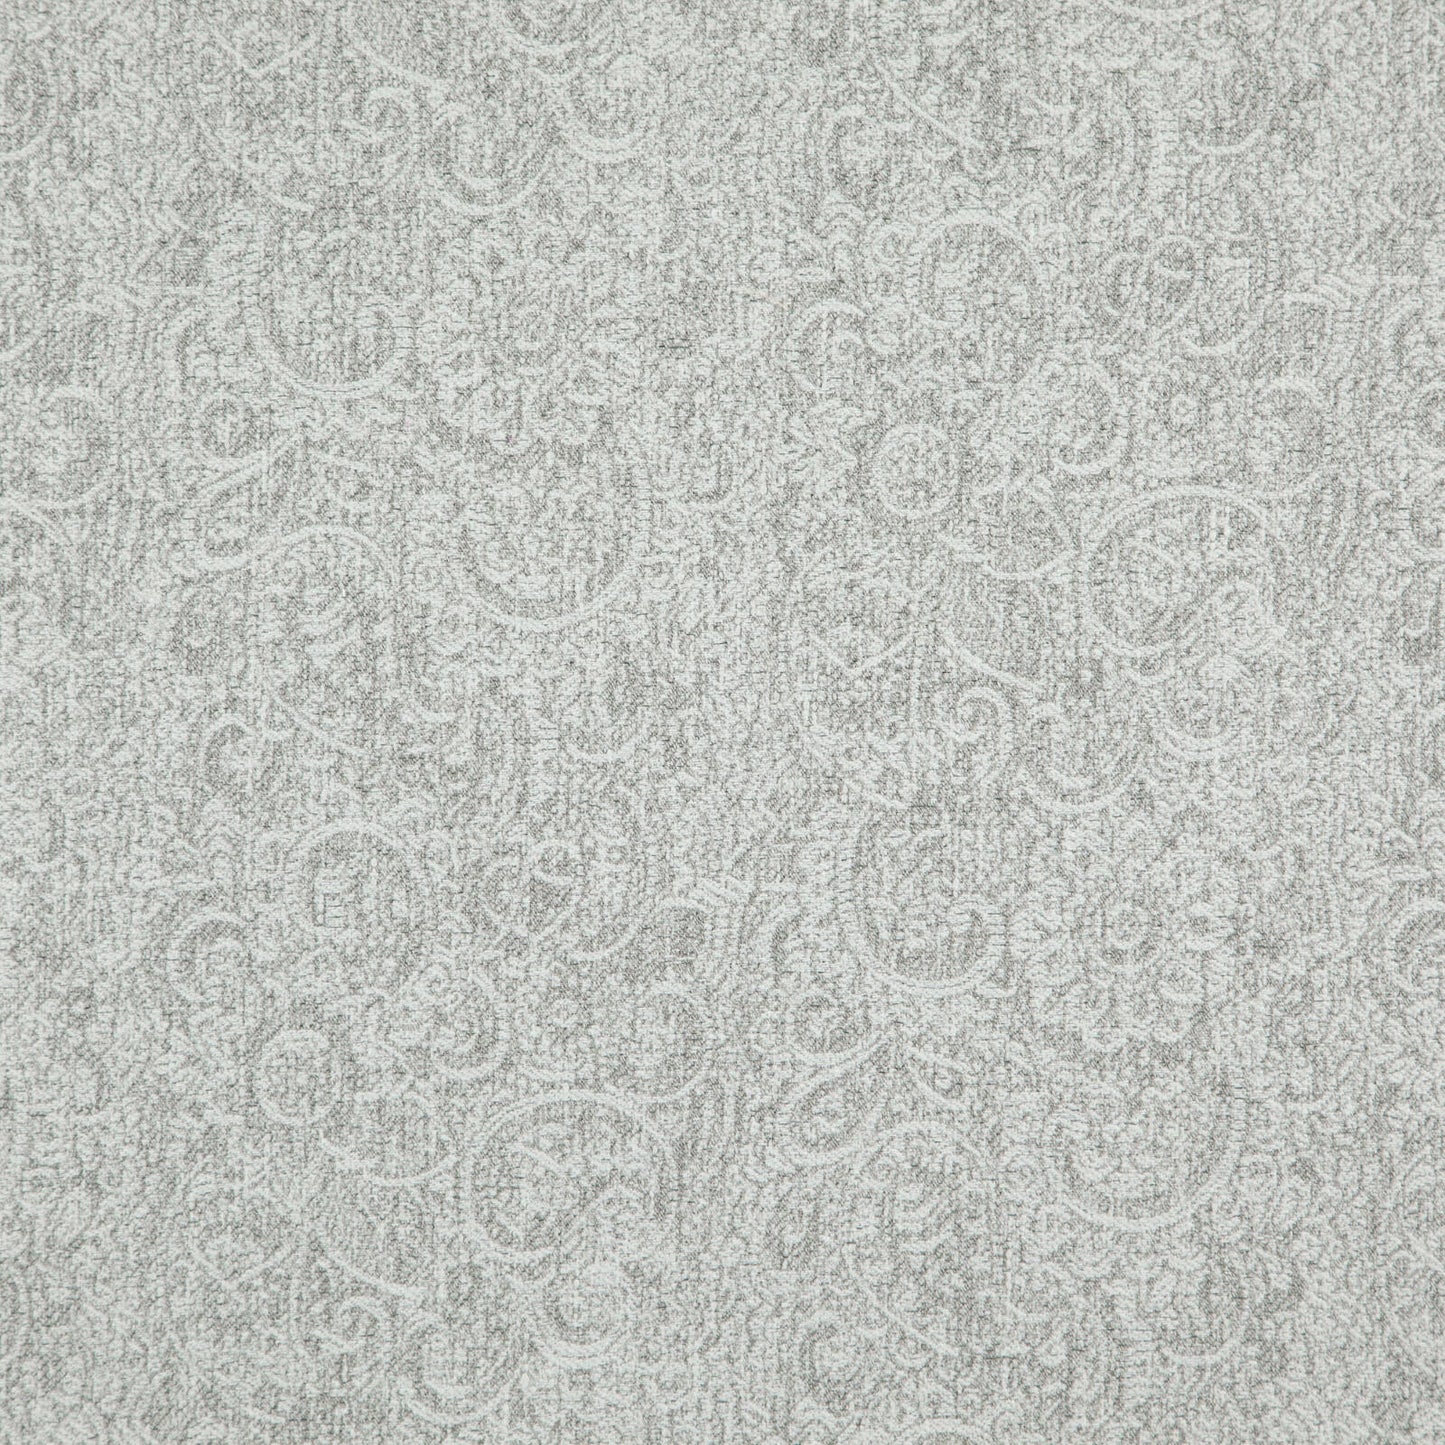 Purchase Maxwell Fabric - Parity, # 105 Feather